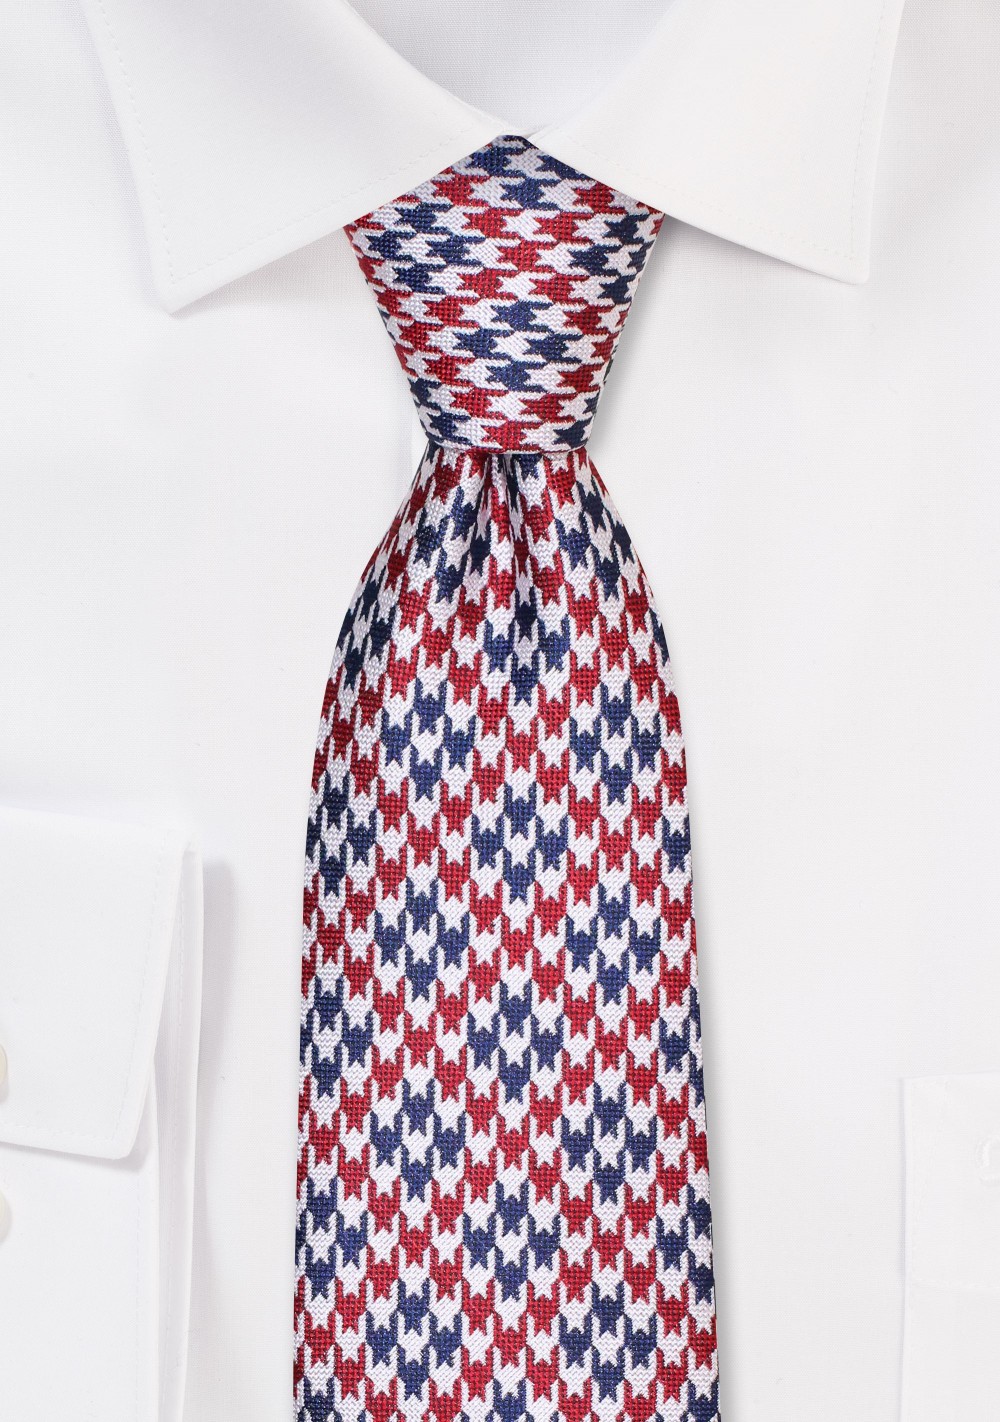 Slim Houndstooth Check Tie in Red, White, and Blue